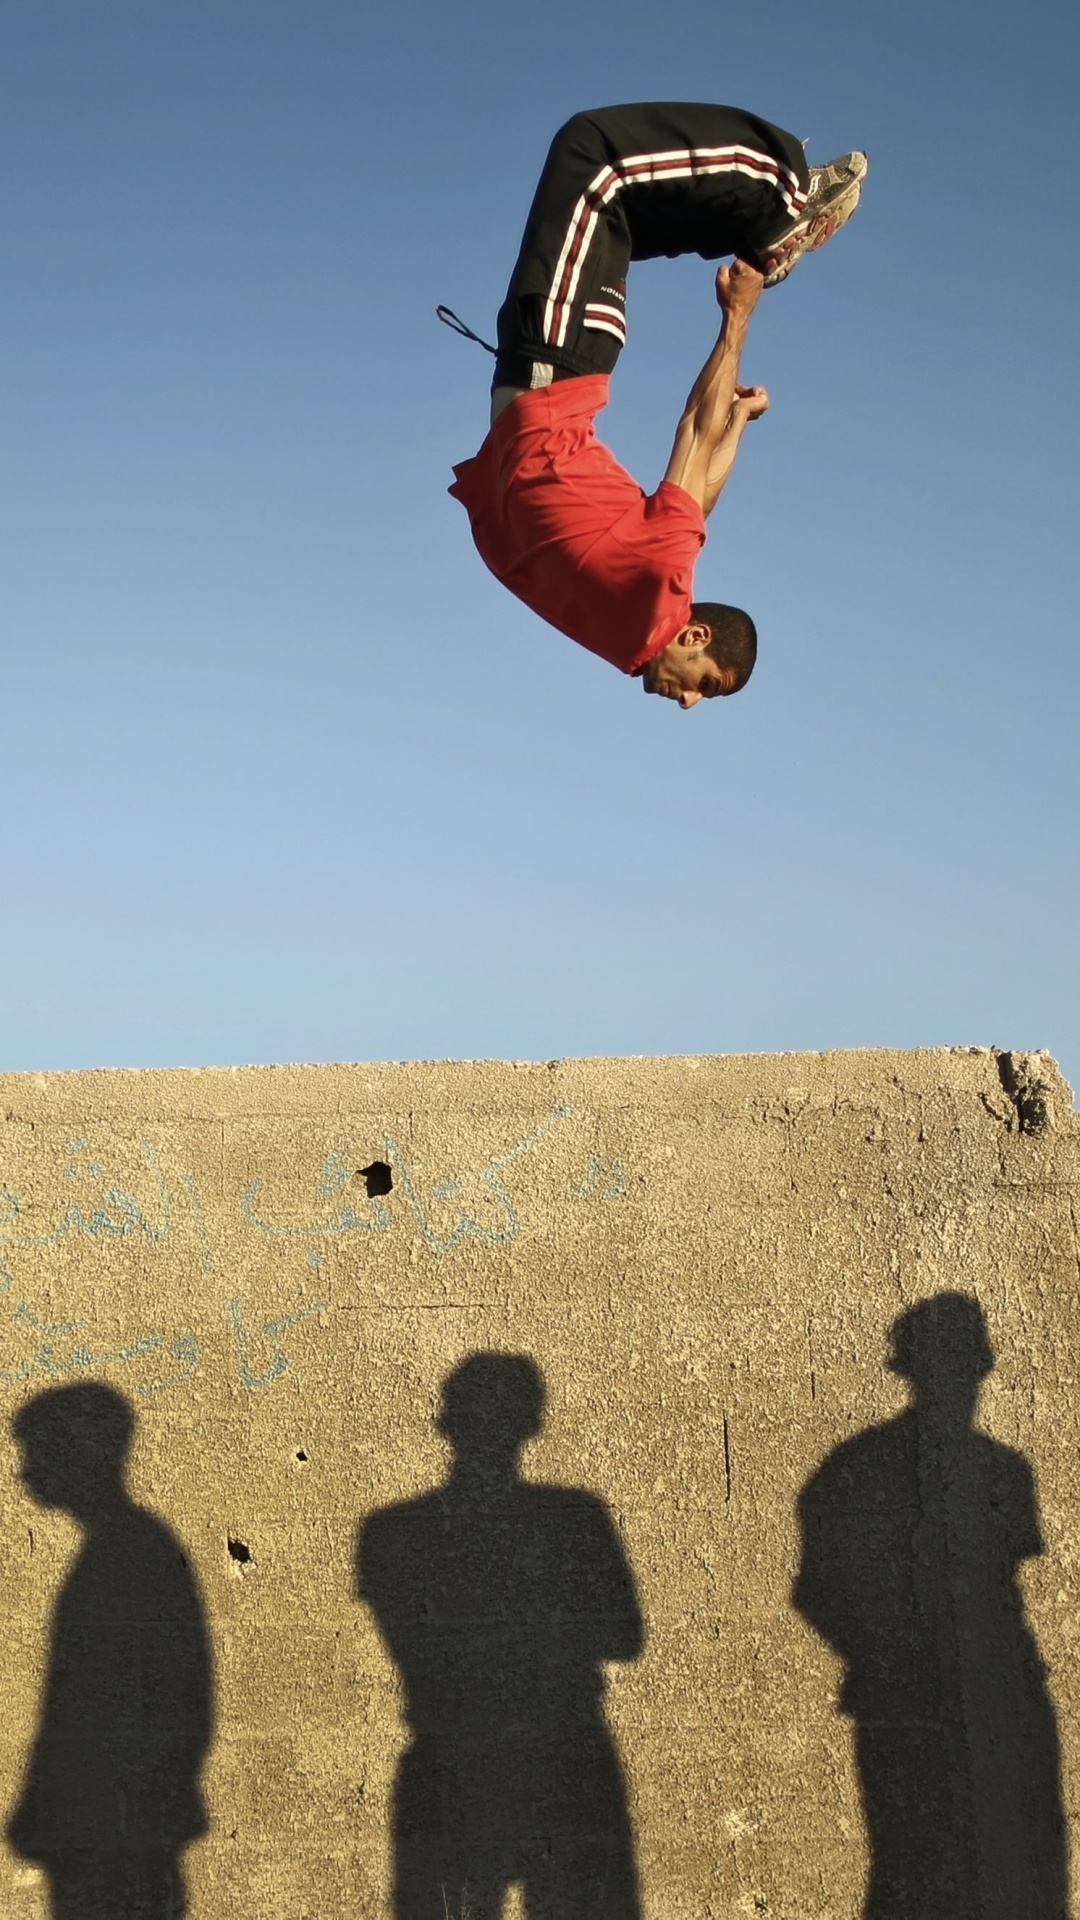 Parkour: Athletic movements, Gymnastics, Urban obstacle course, Sport. 1080x1920 Full HD Wallpaper.